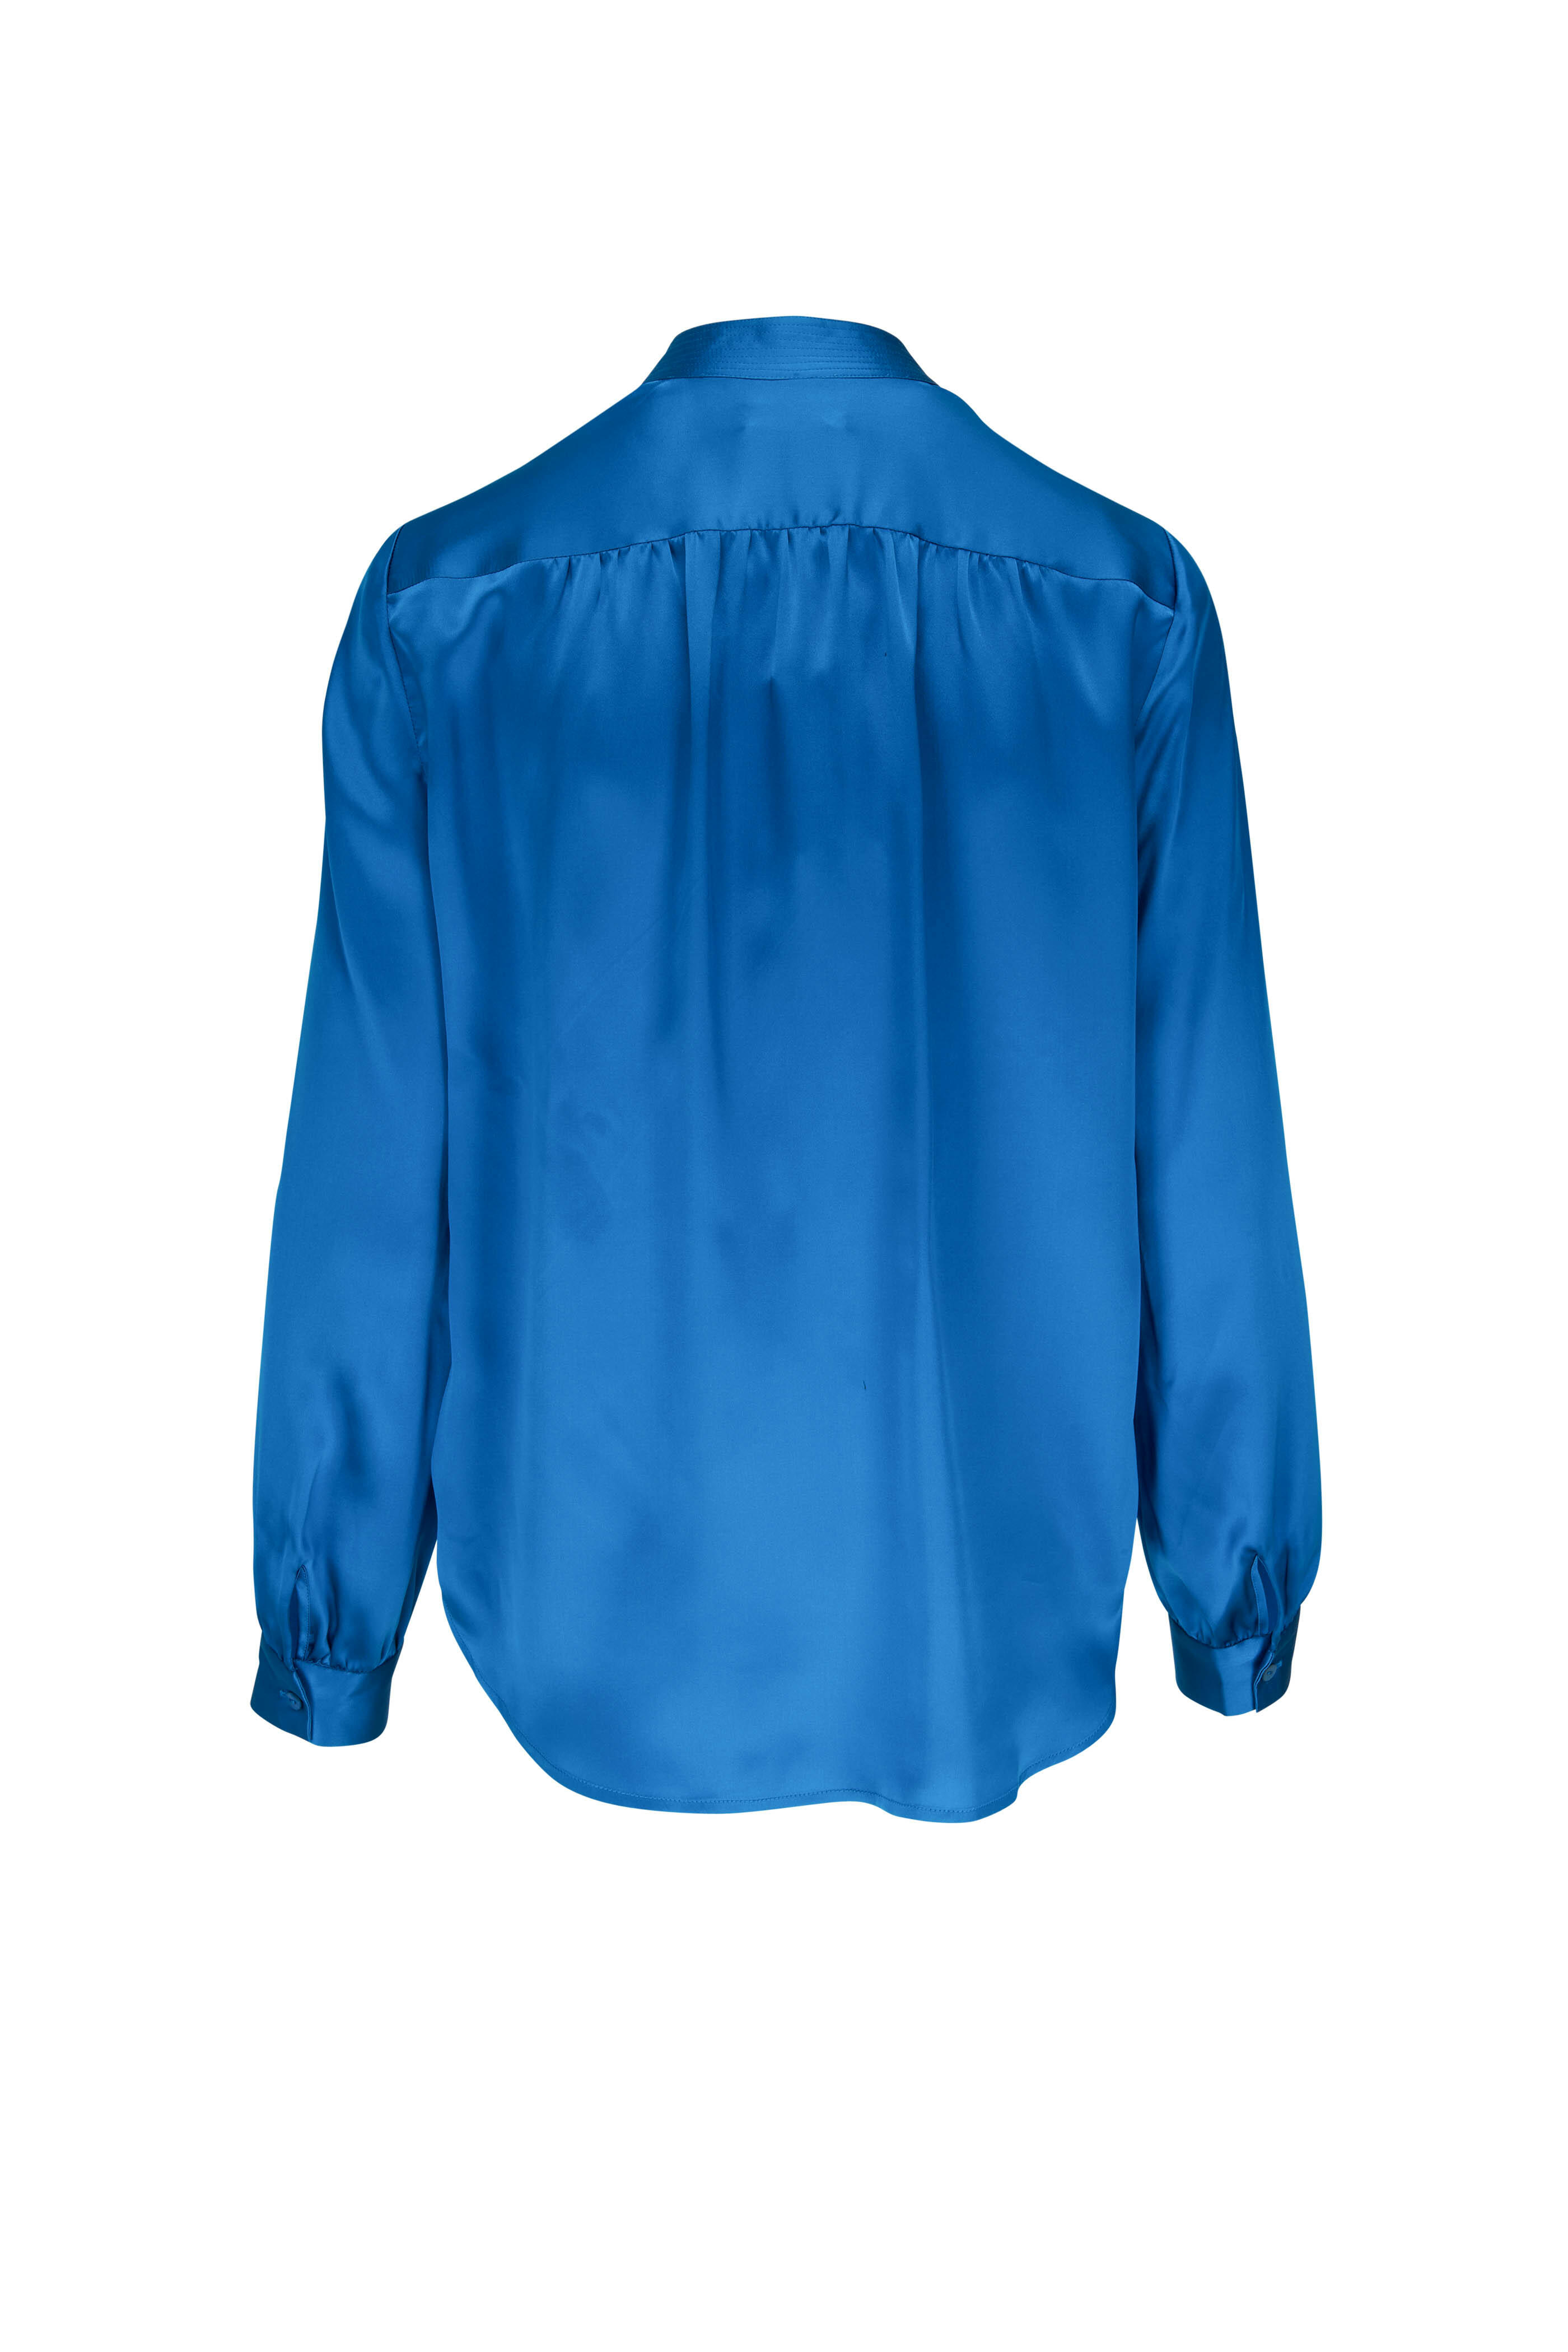 L'AGENCE Bianca Band Collar Blouse in Teal – manhattan casuals